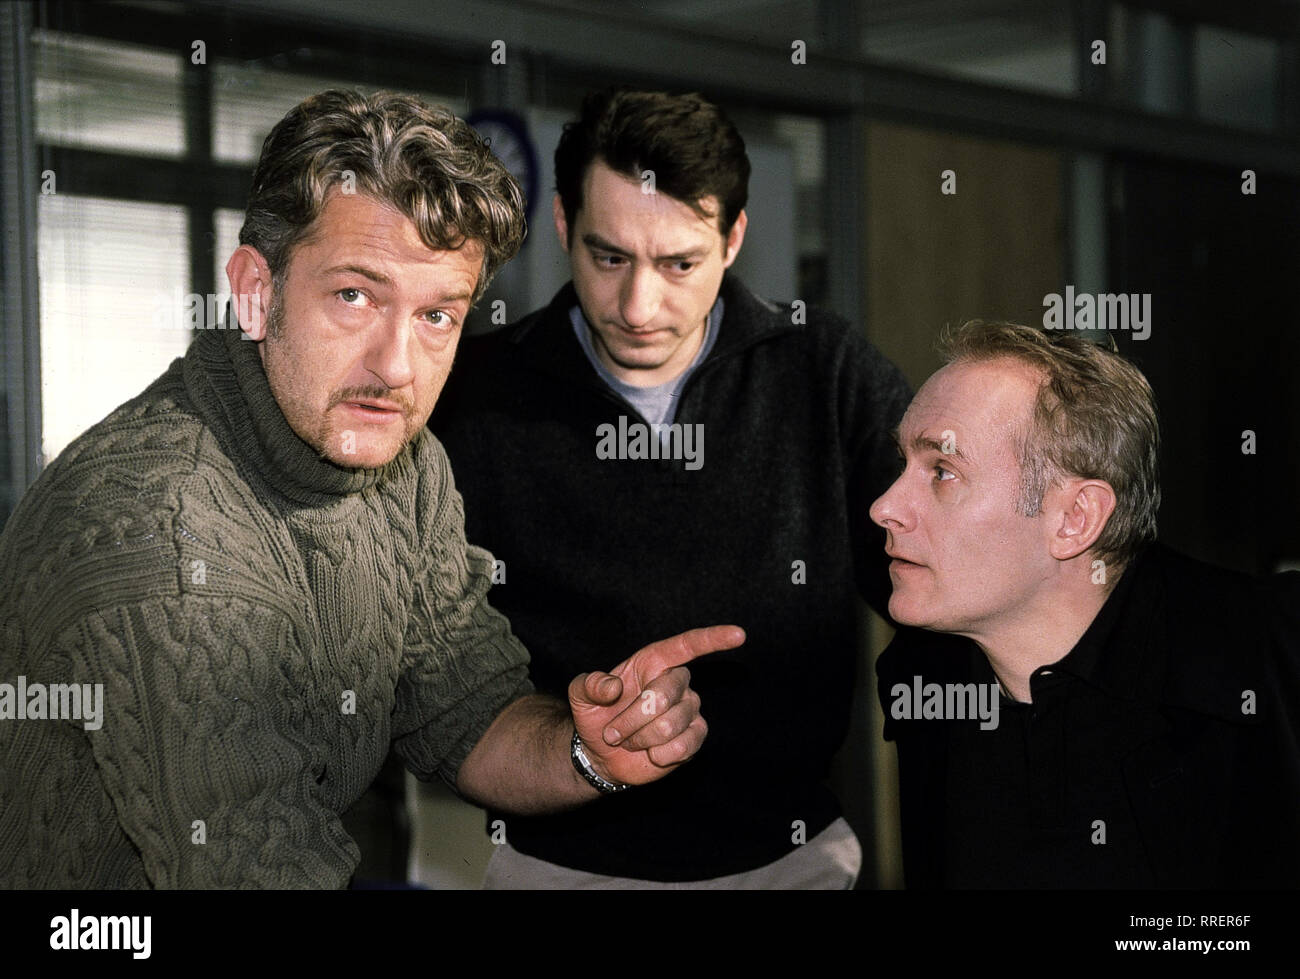 Herbert Fritsch High Resolution Stock Photography and Images - Alamy